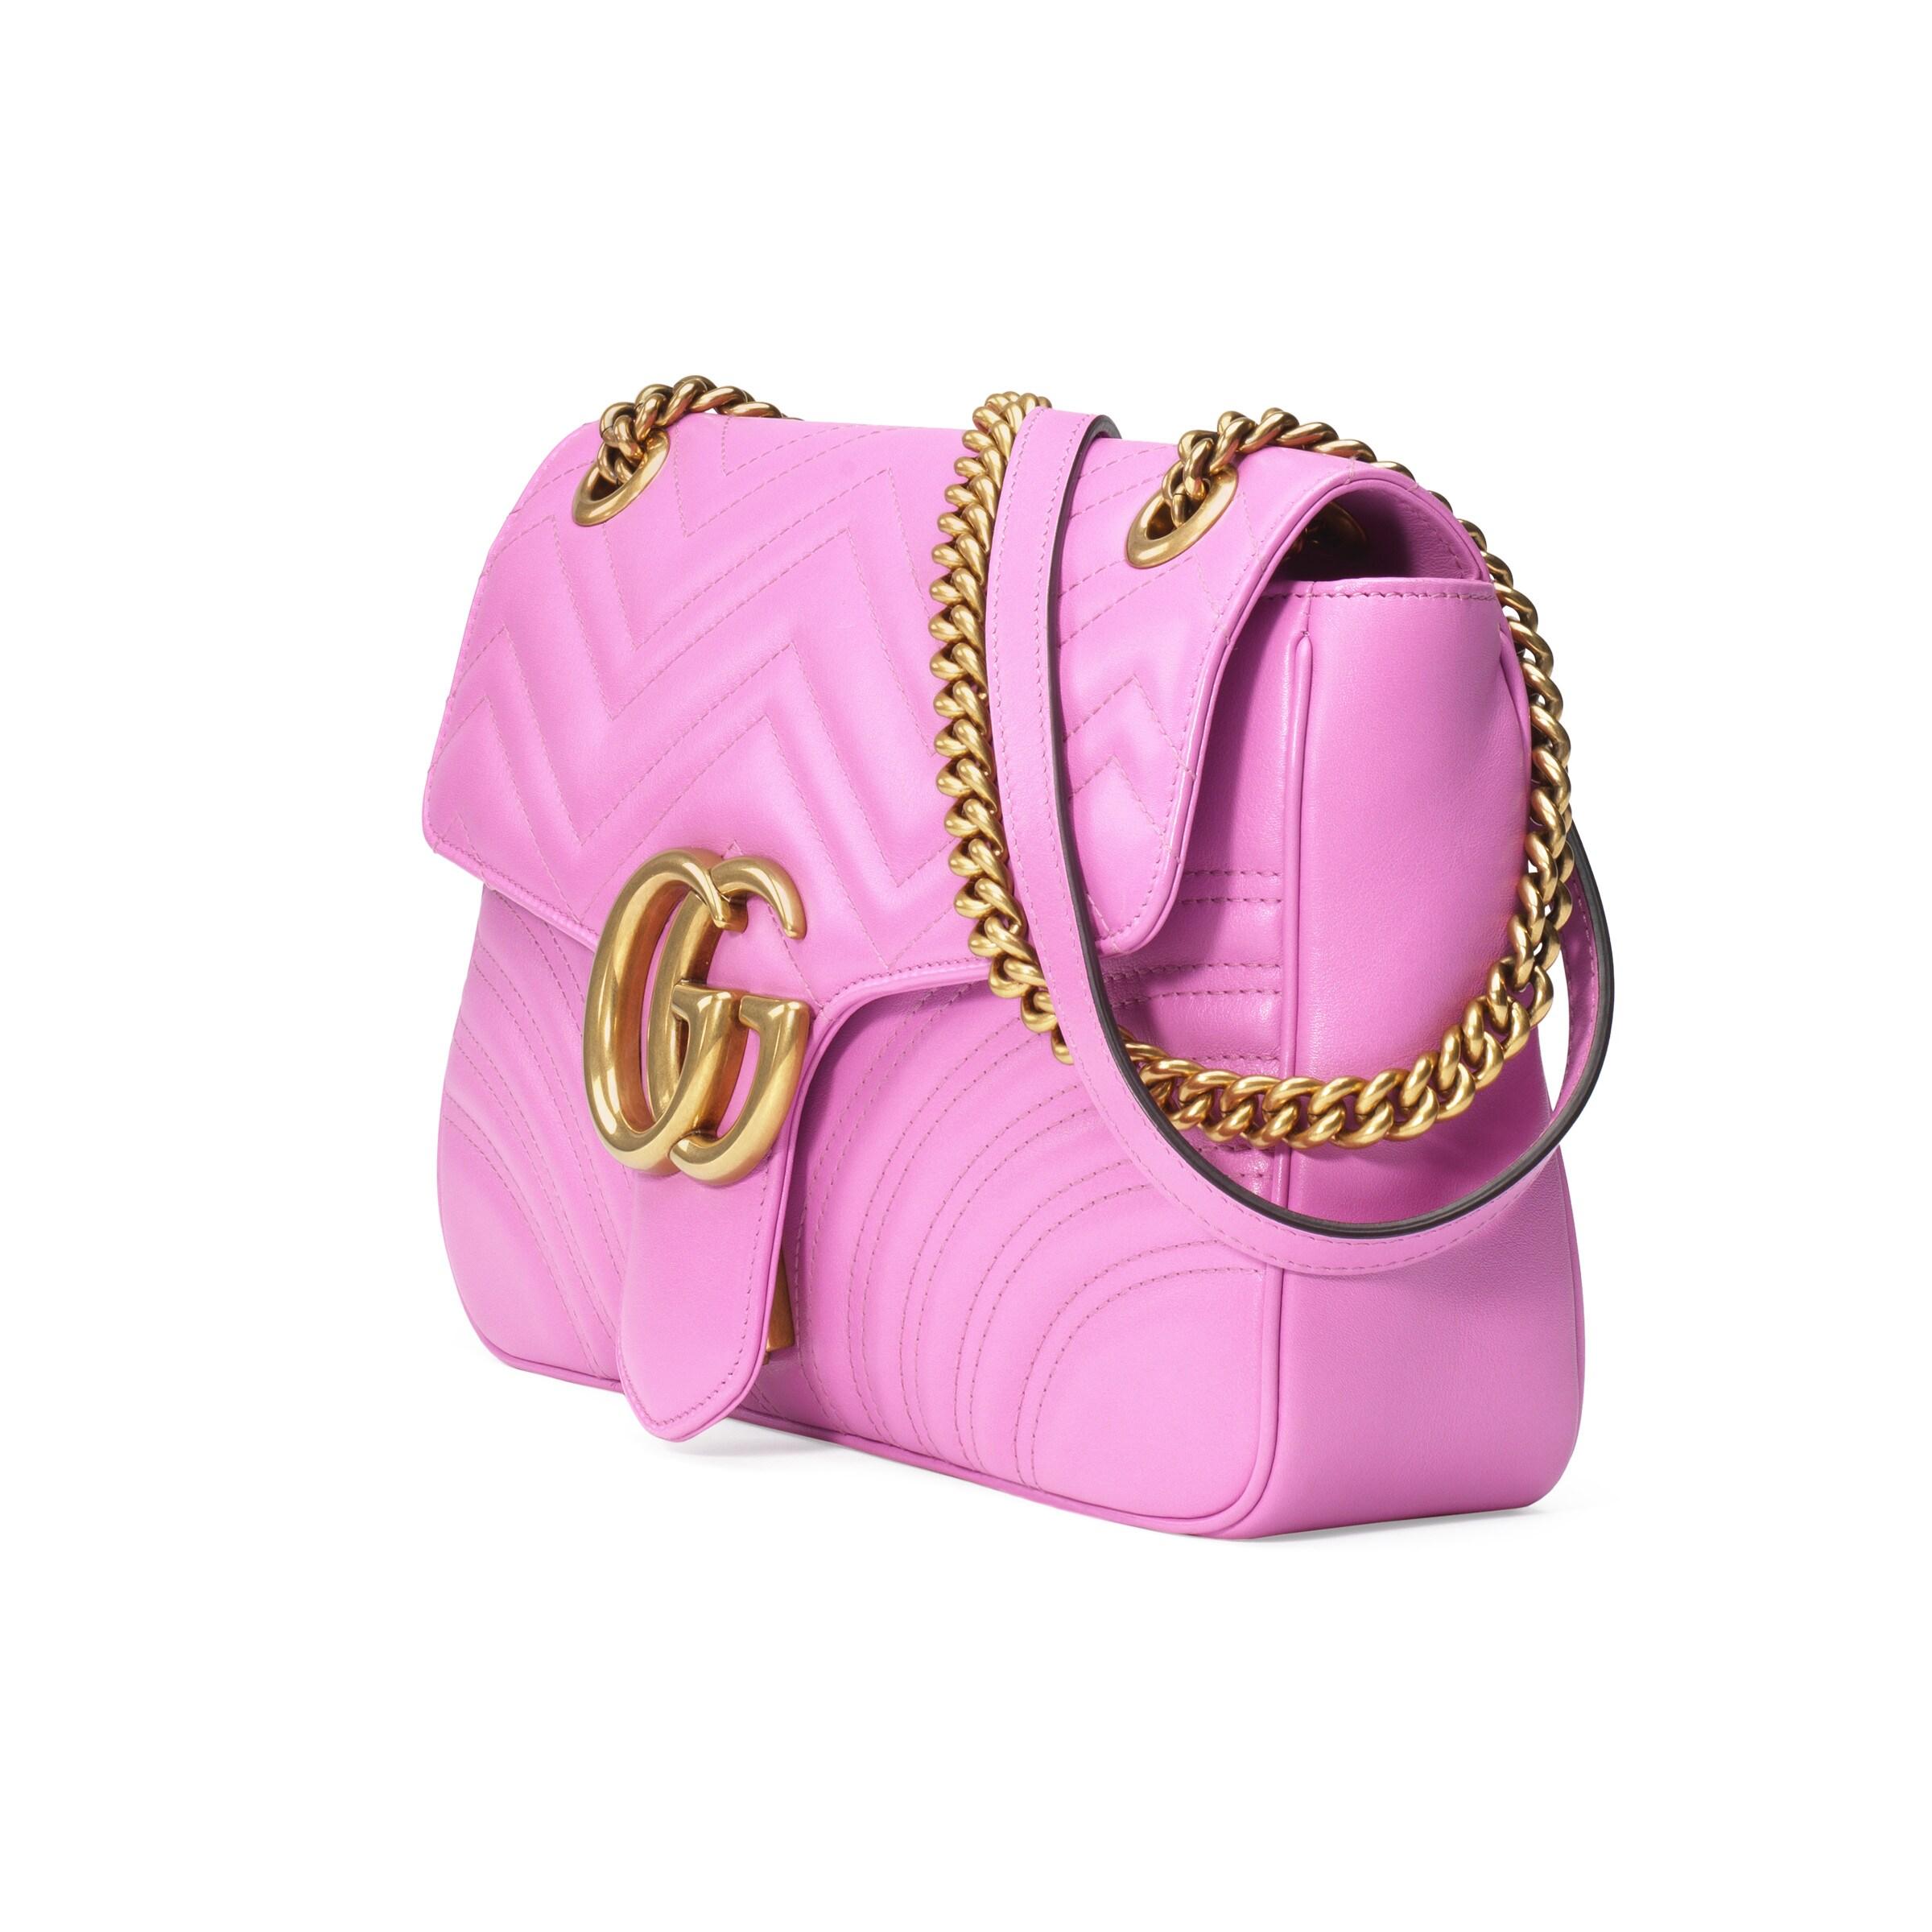 Gucci 2016 Re-edition GG Marmont Bag in Pink | Lyst